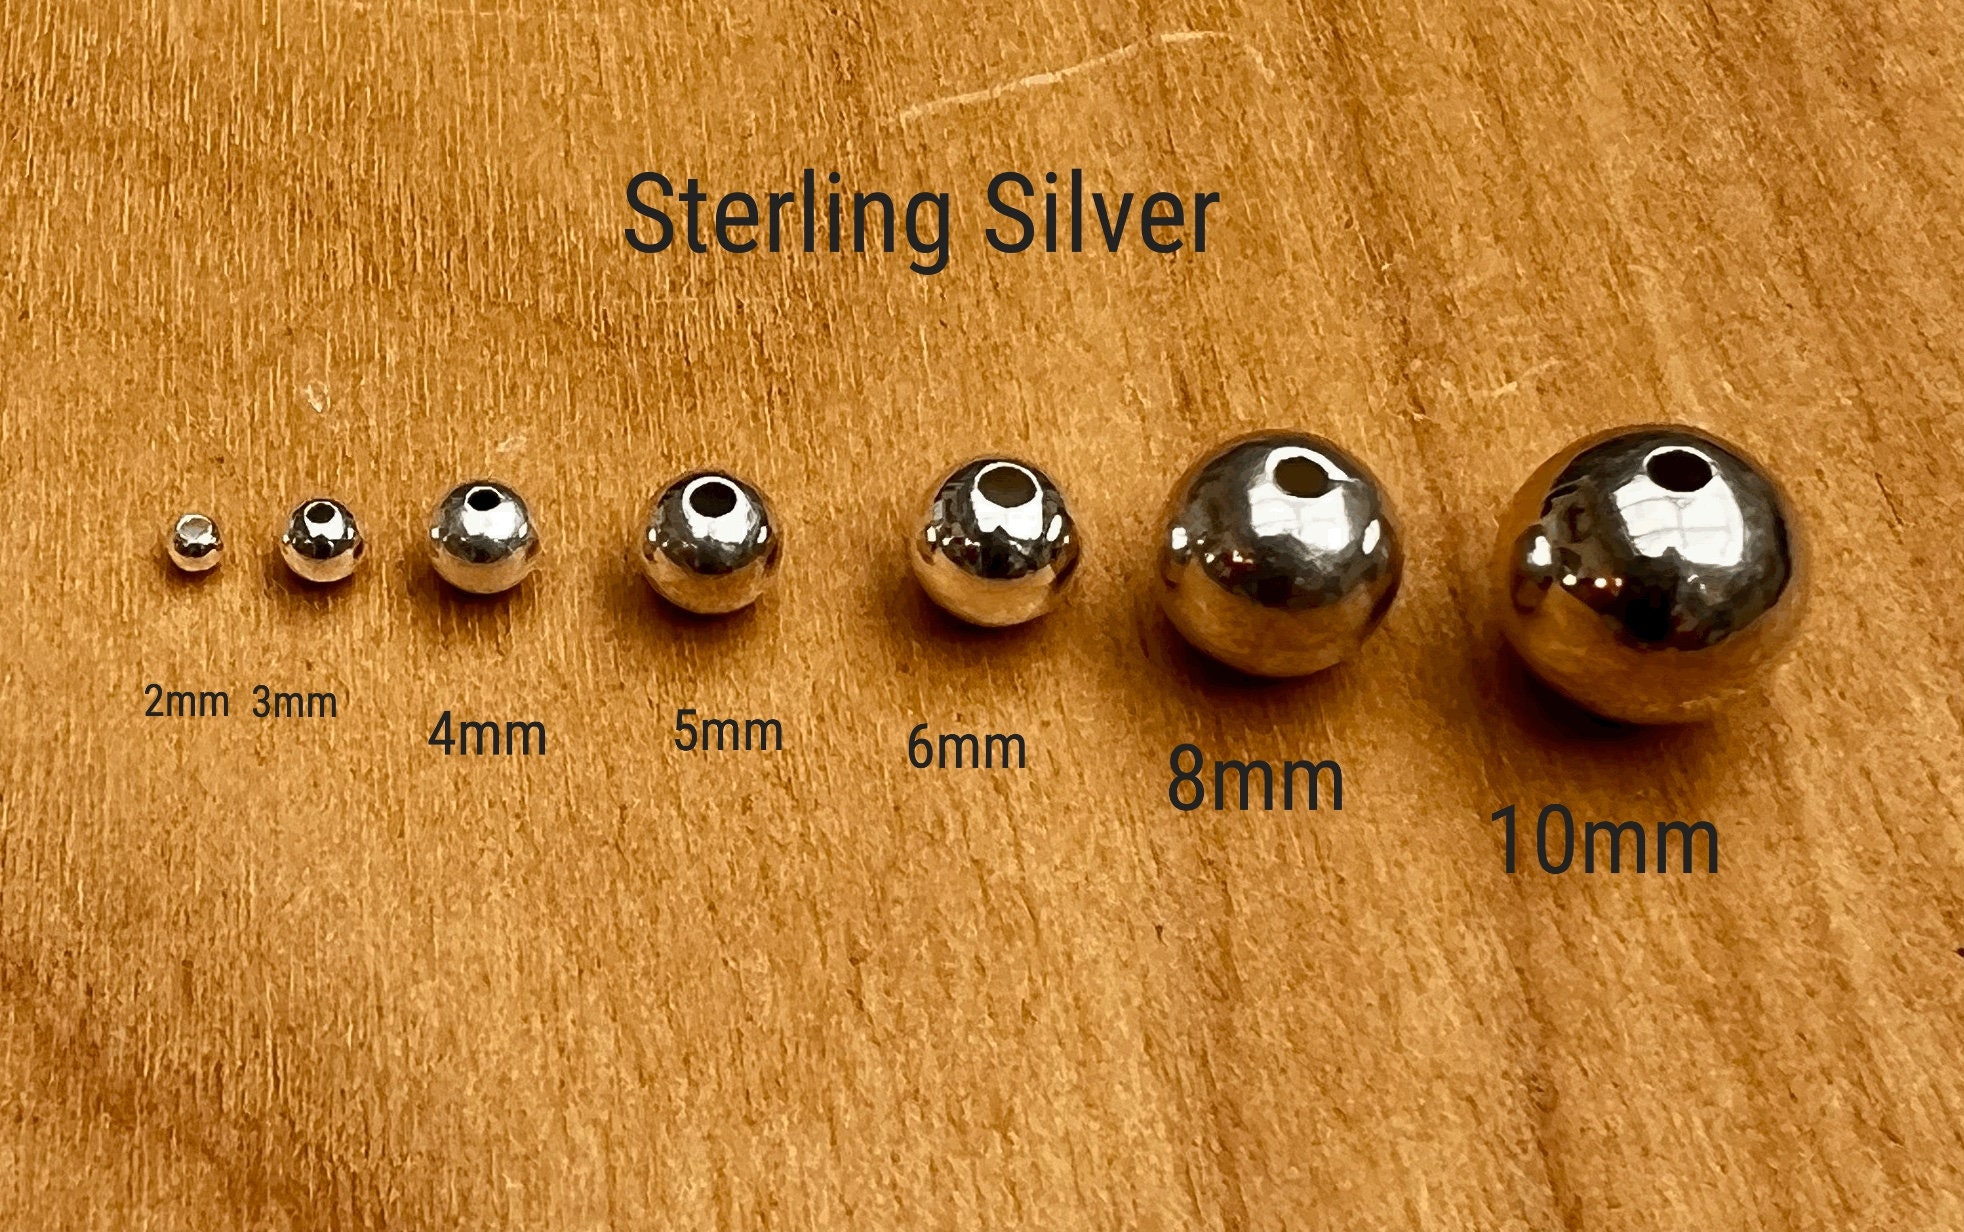  5pcs Adabele Authentic 925 Sterling Silver 8mm (0.31 Inch)  Saucer Rondelle Spacer Loose Beads for Jewelry Making SS52-BB : Arts,  Crafts & Sewing